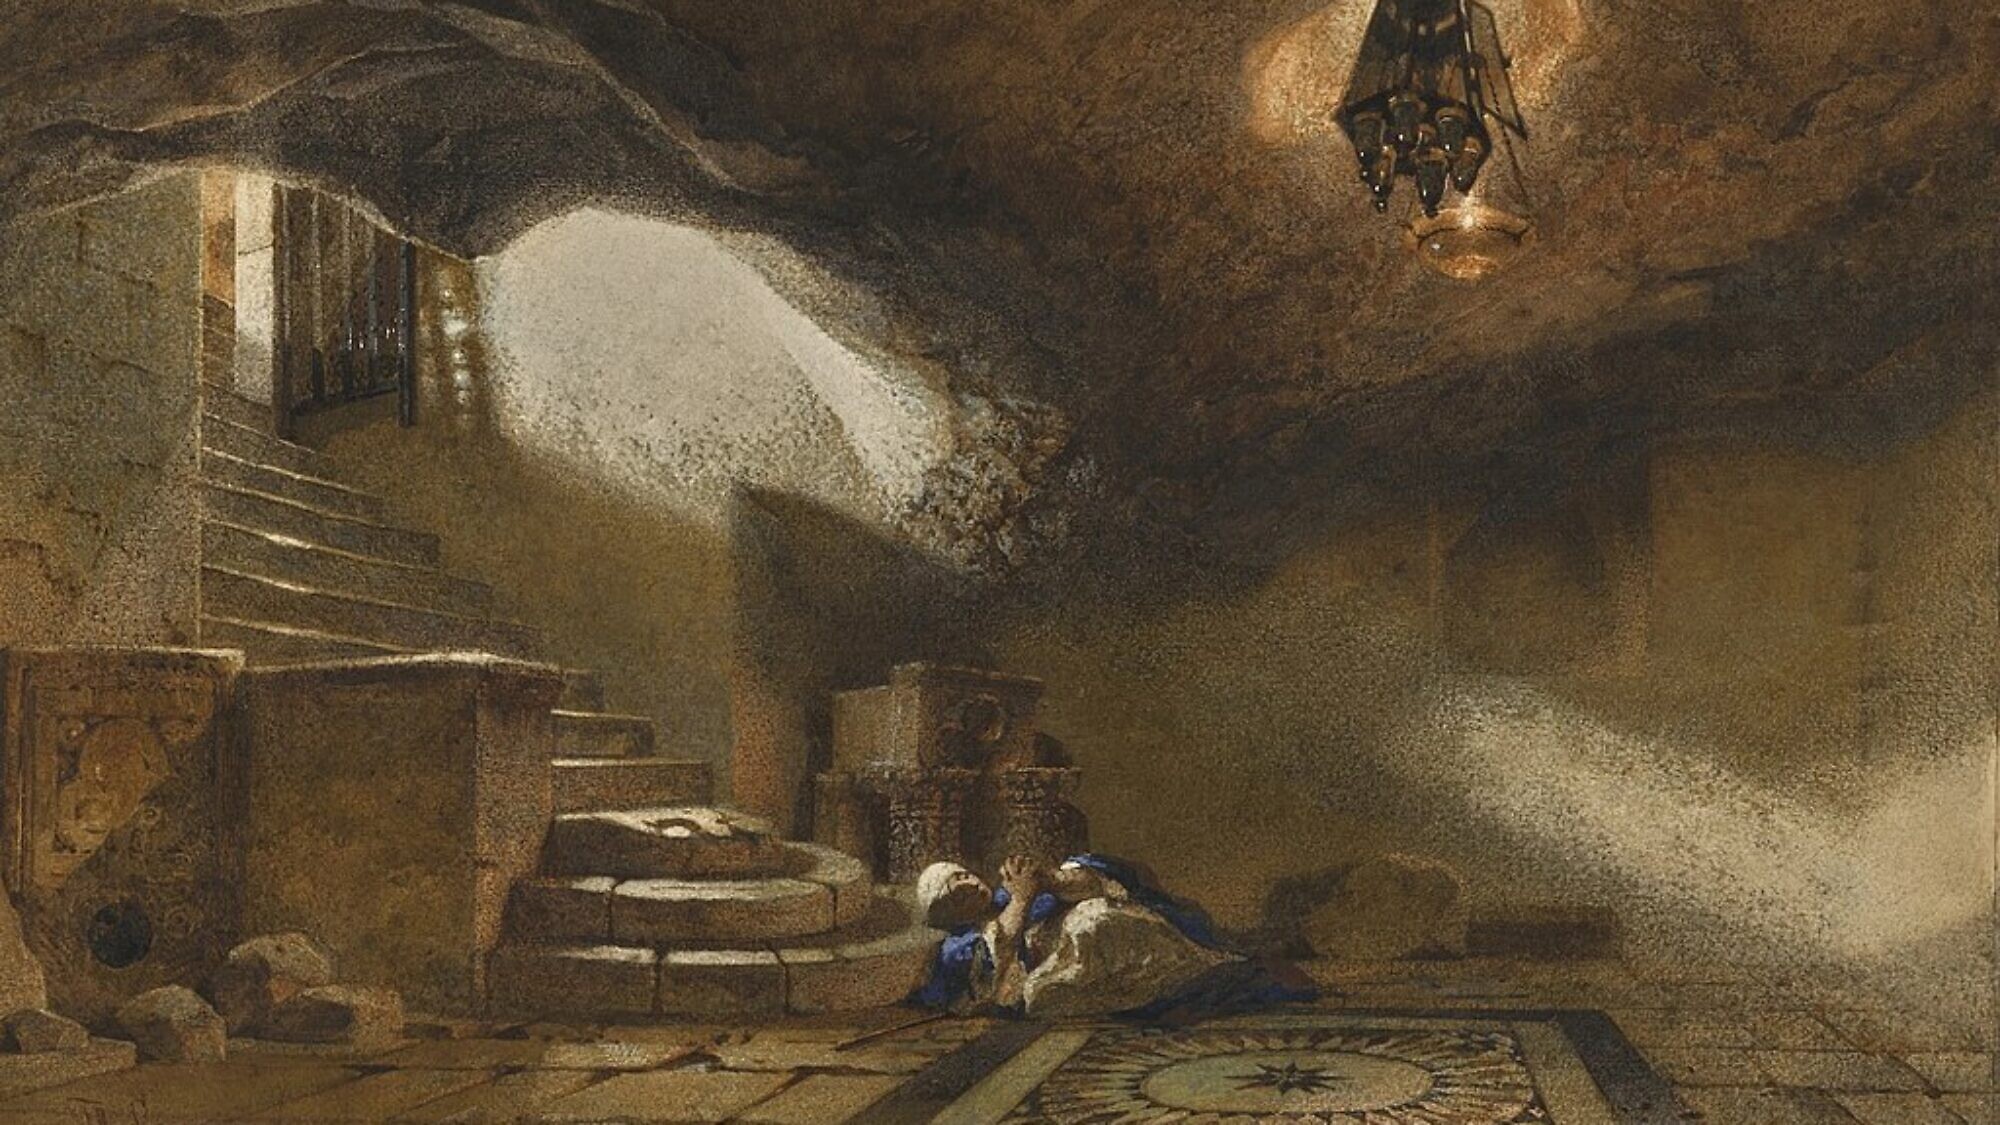 "The Cave Beneath the Holy Rock, Jerusalem" by Carl Haag, 1859. Pencil and watercolor on paper. Credit: Wikimedia Commons.